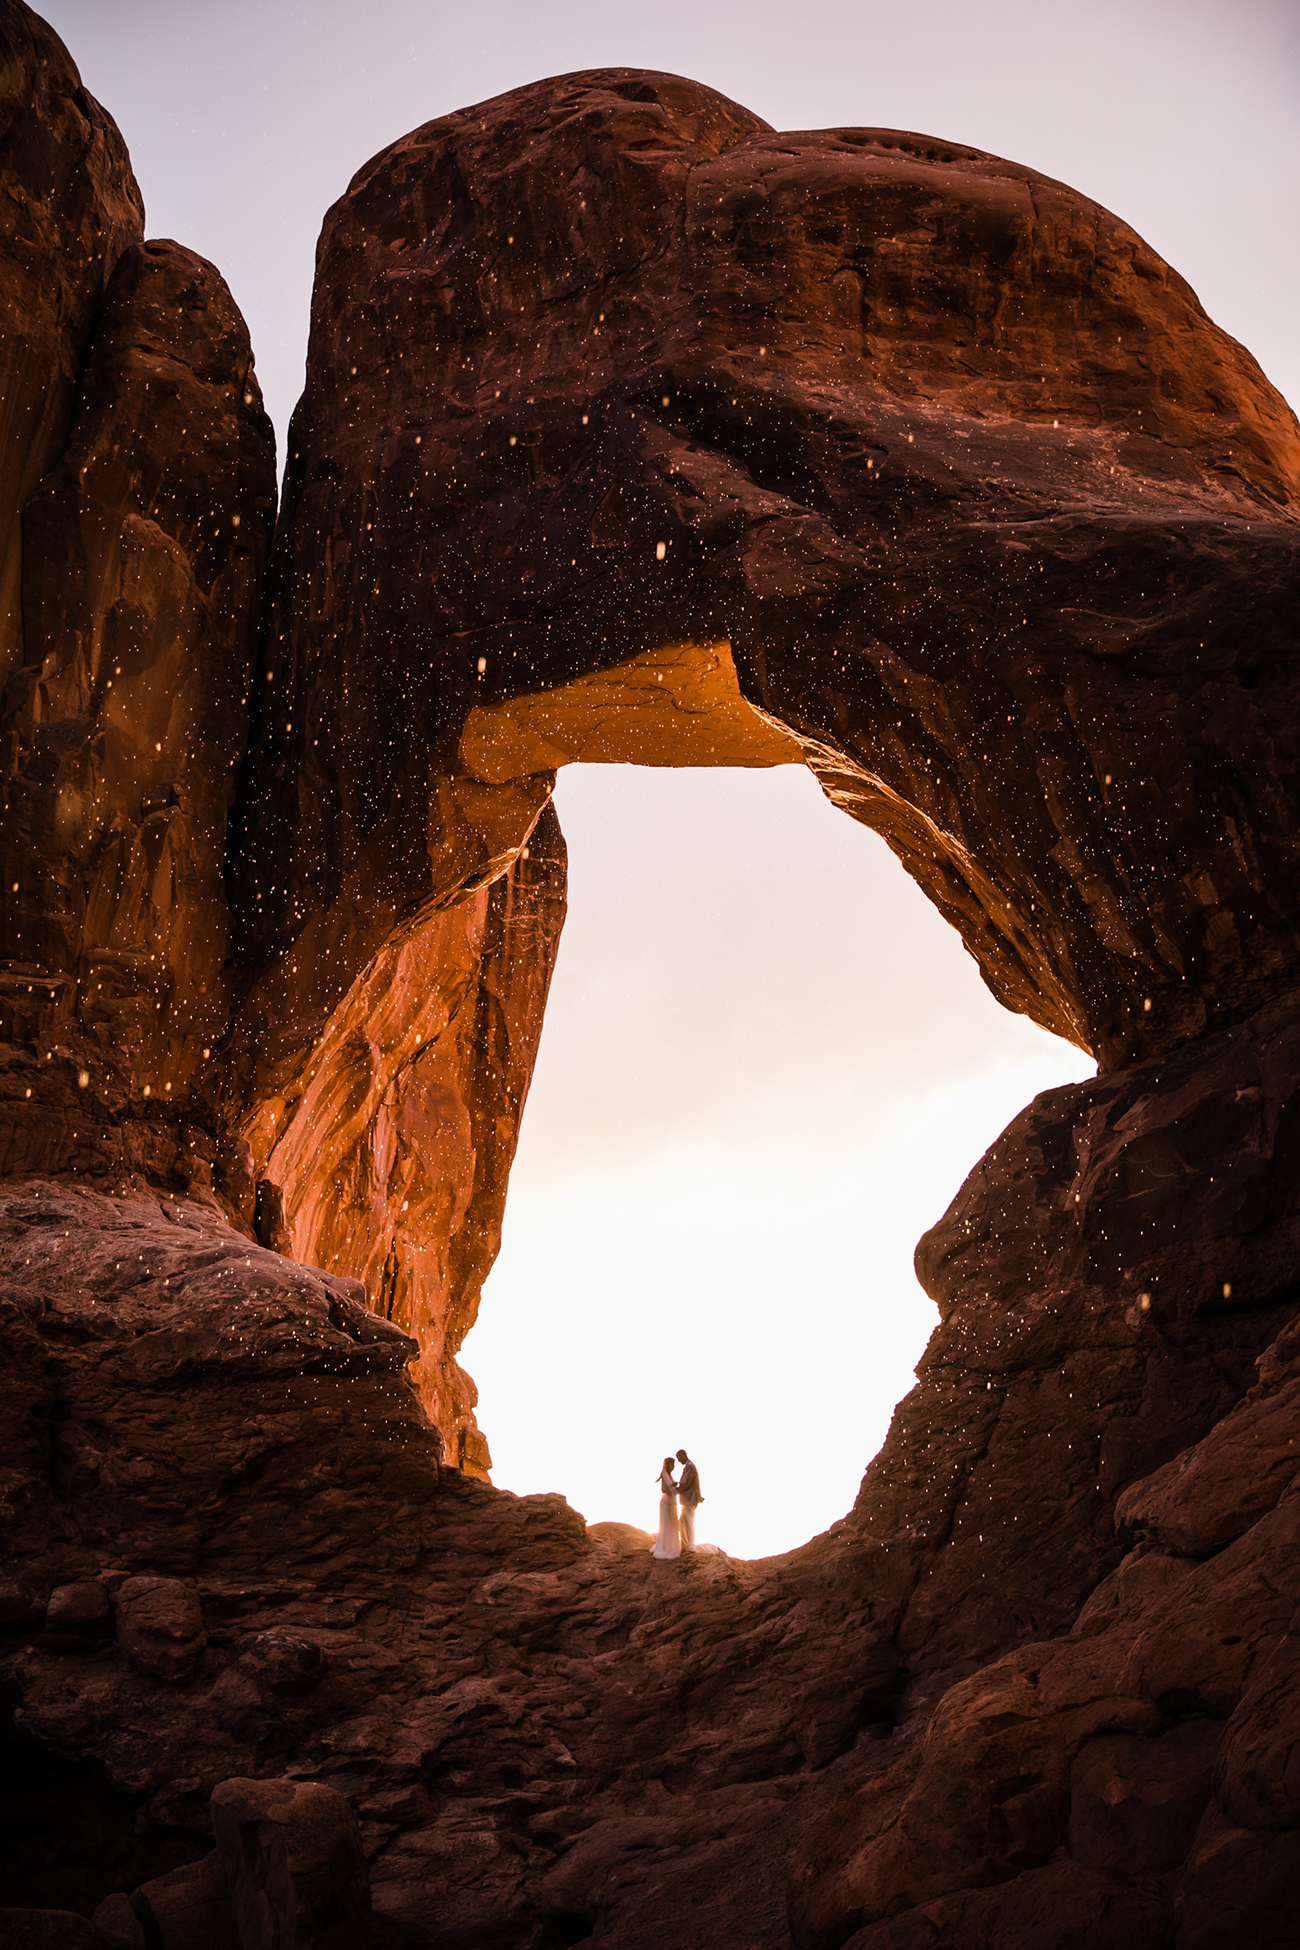 The Most Stunning National Park Weddings For an Epic ?I Do?